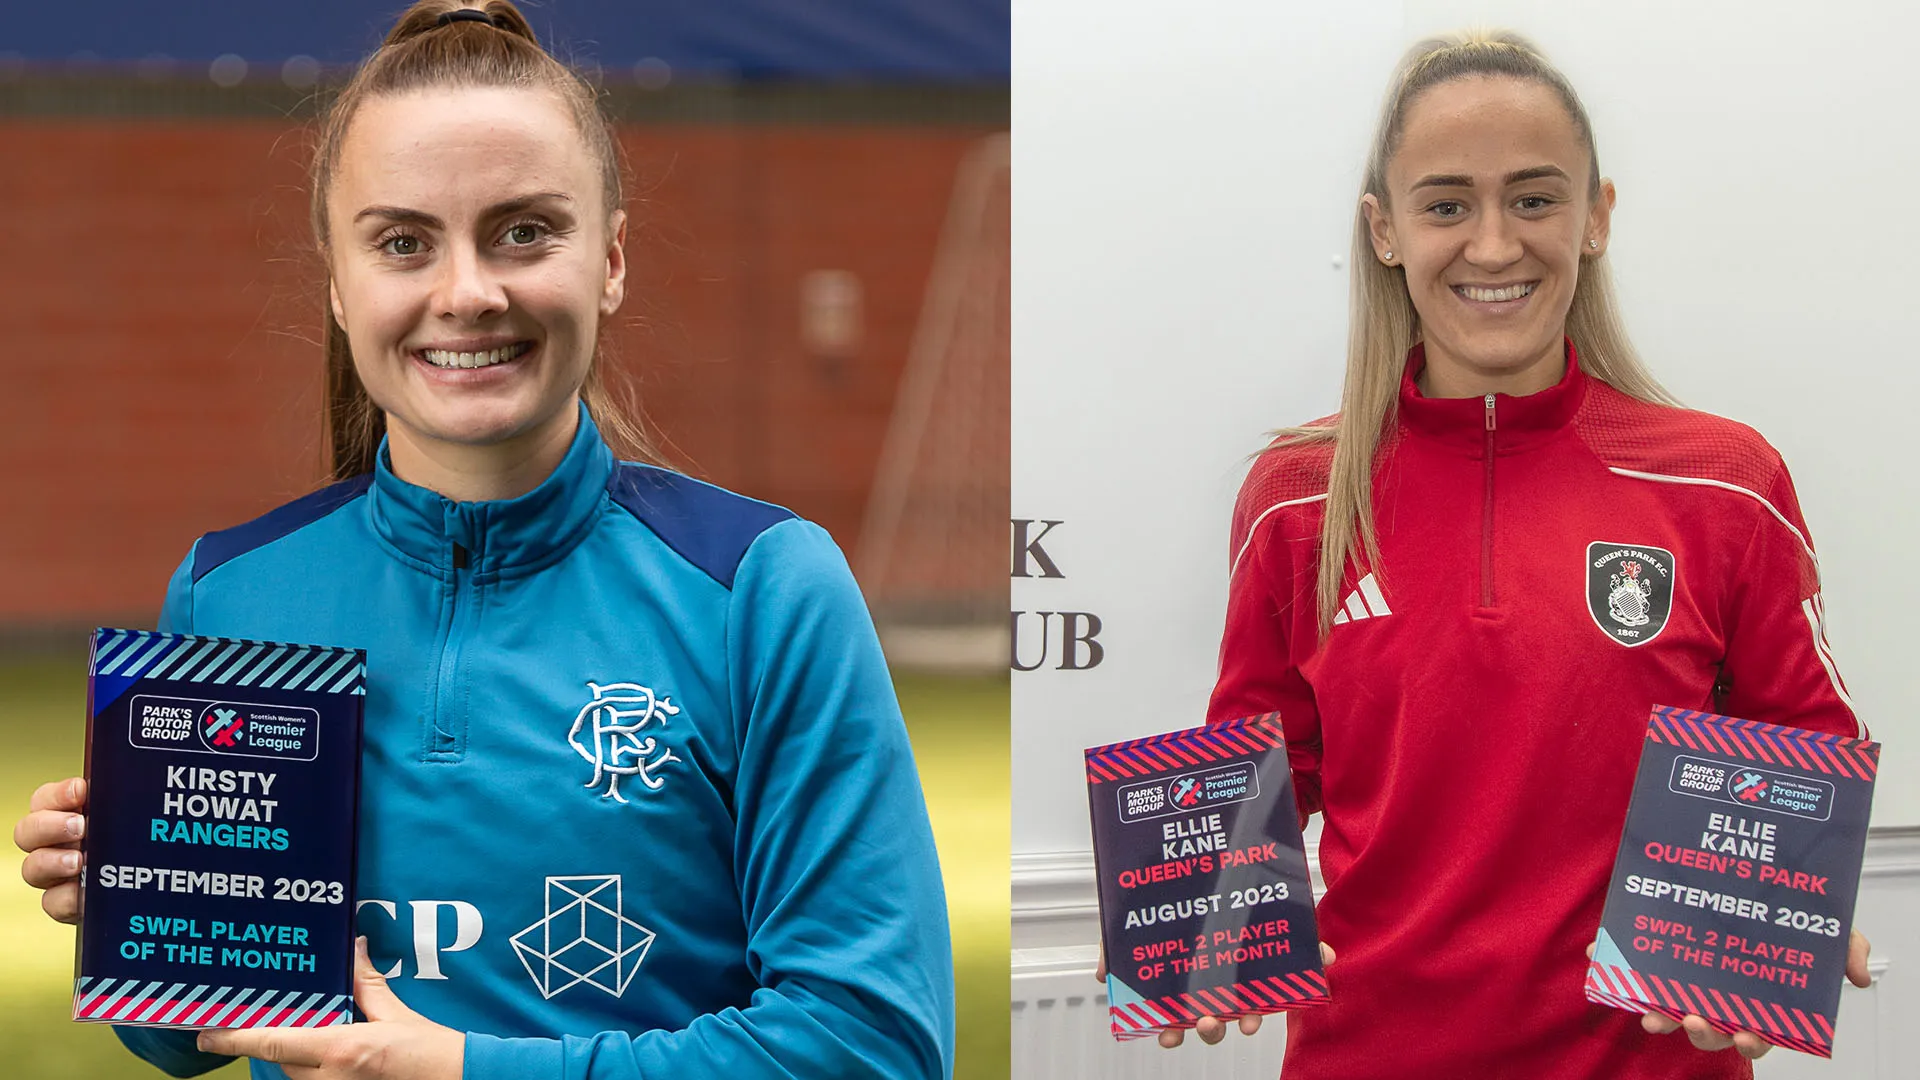 Image for Kane wins back-to-back SWPL 2 awards as Howat wins SWPL Player of the Month for first time